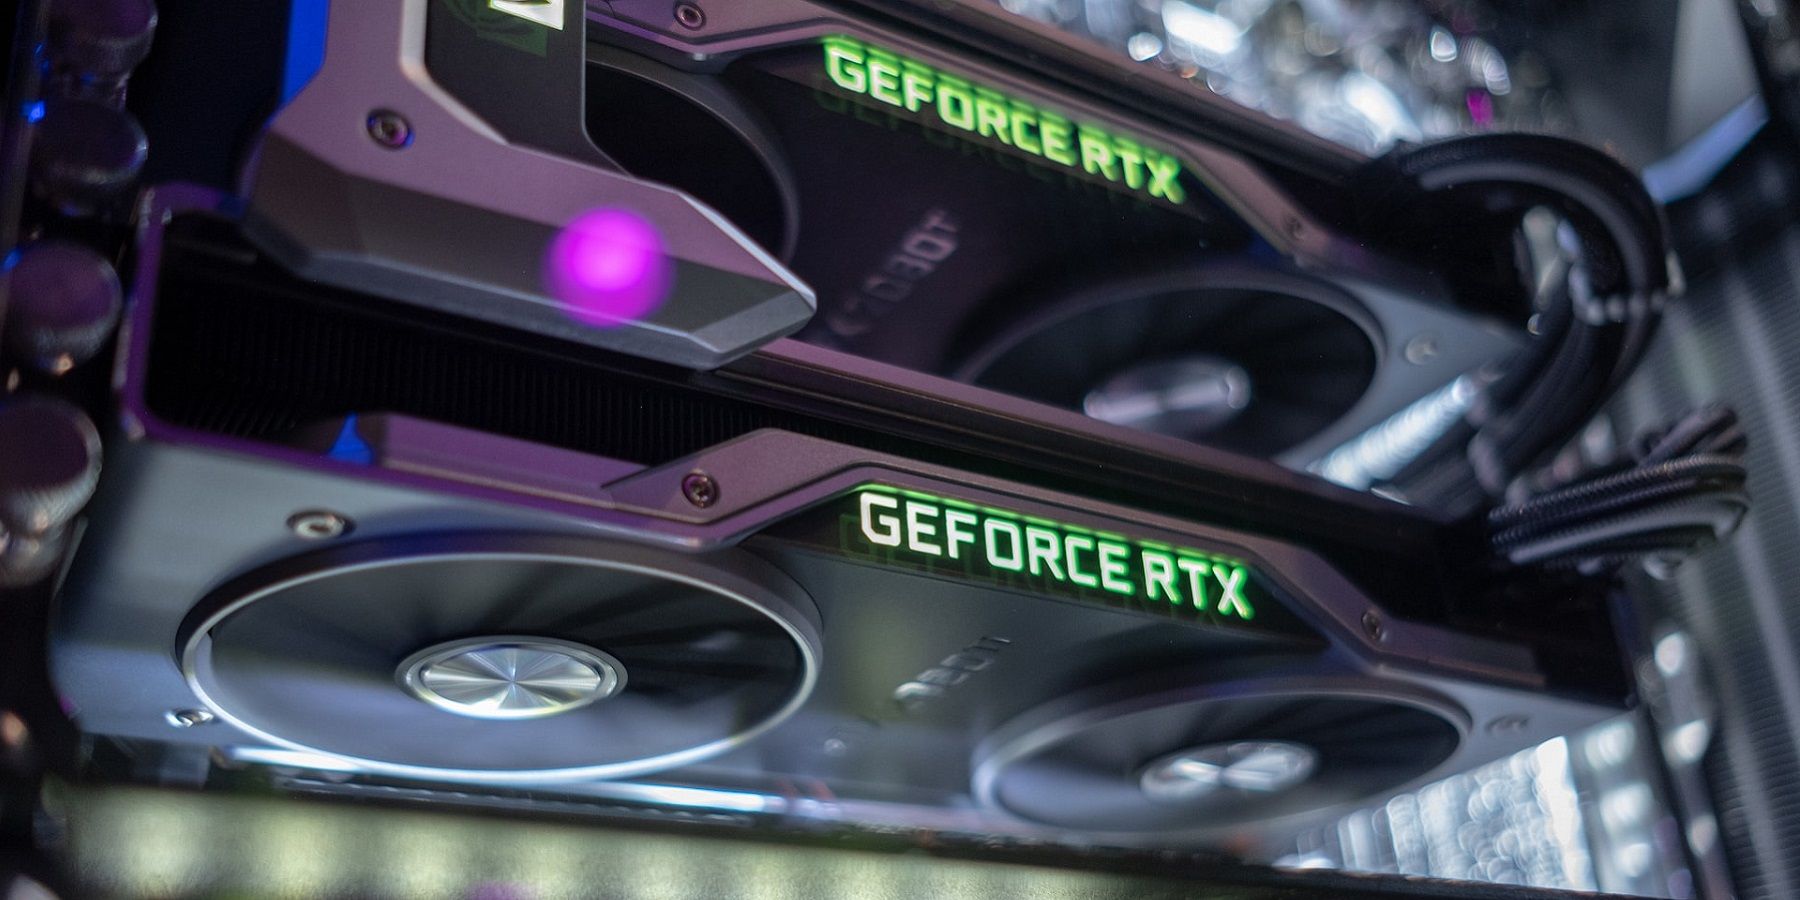 A close-up of a couple of Nvidia RTX graphics cards in a PC.